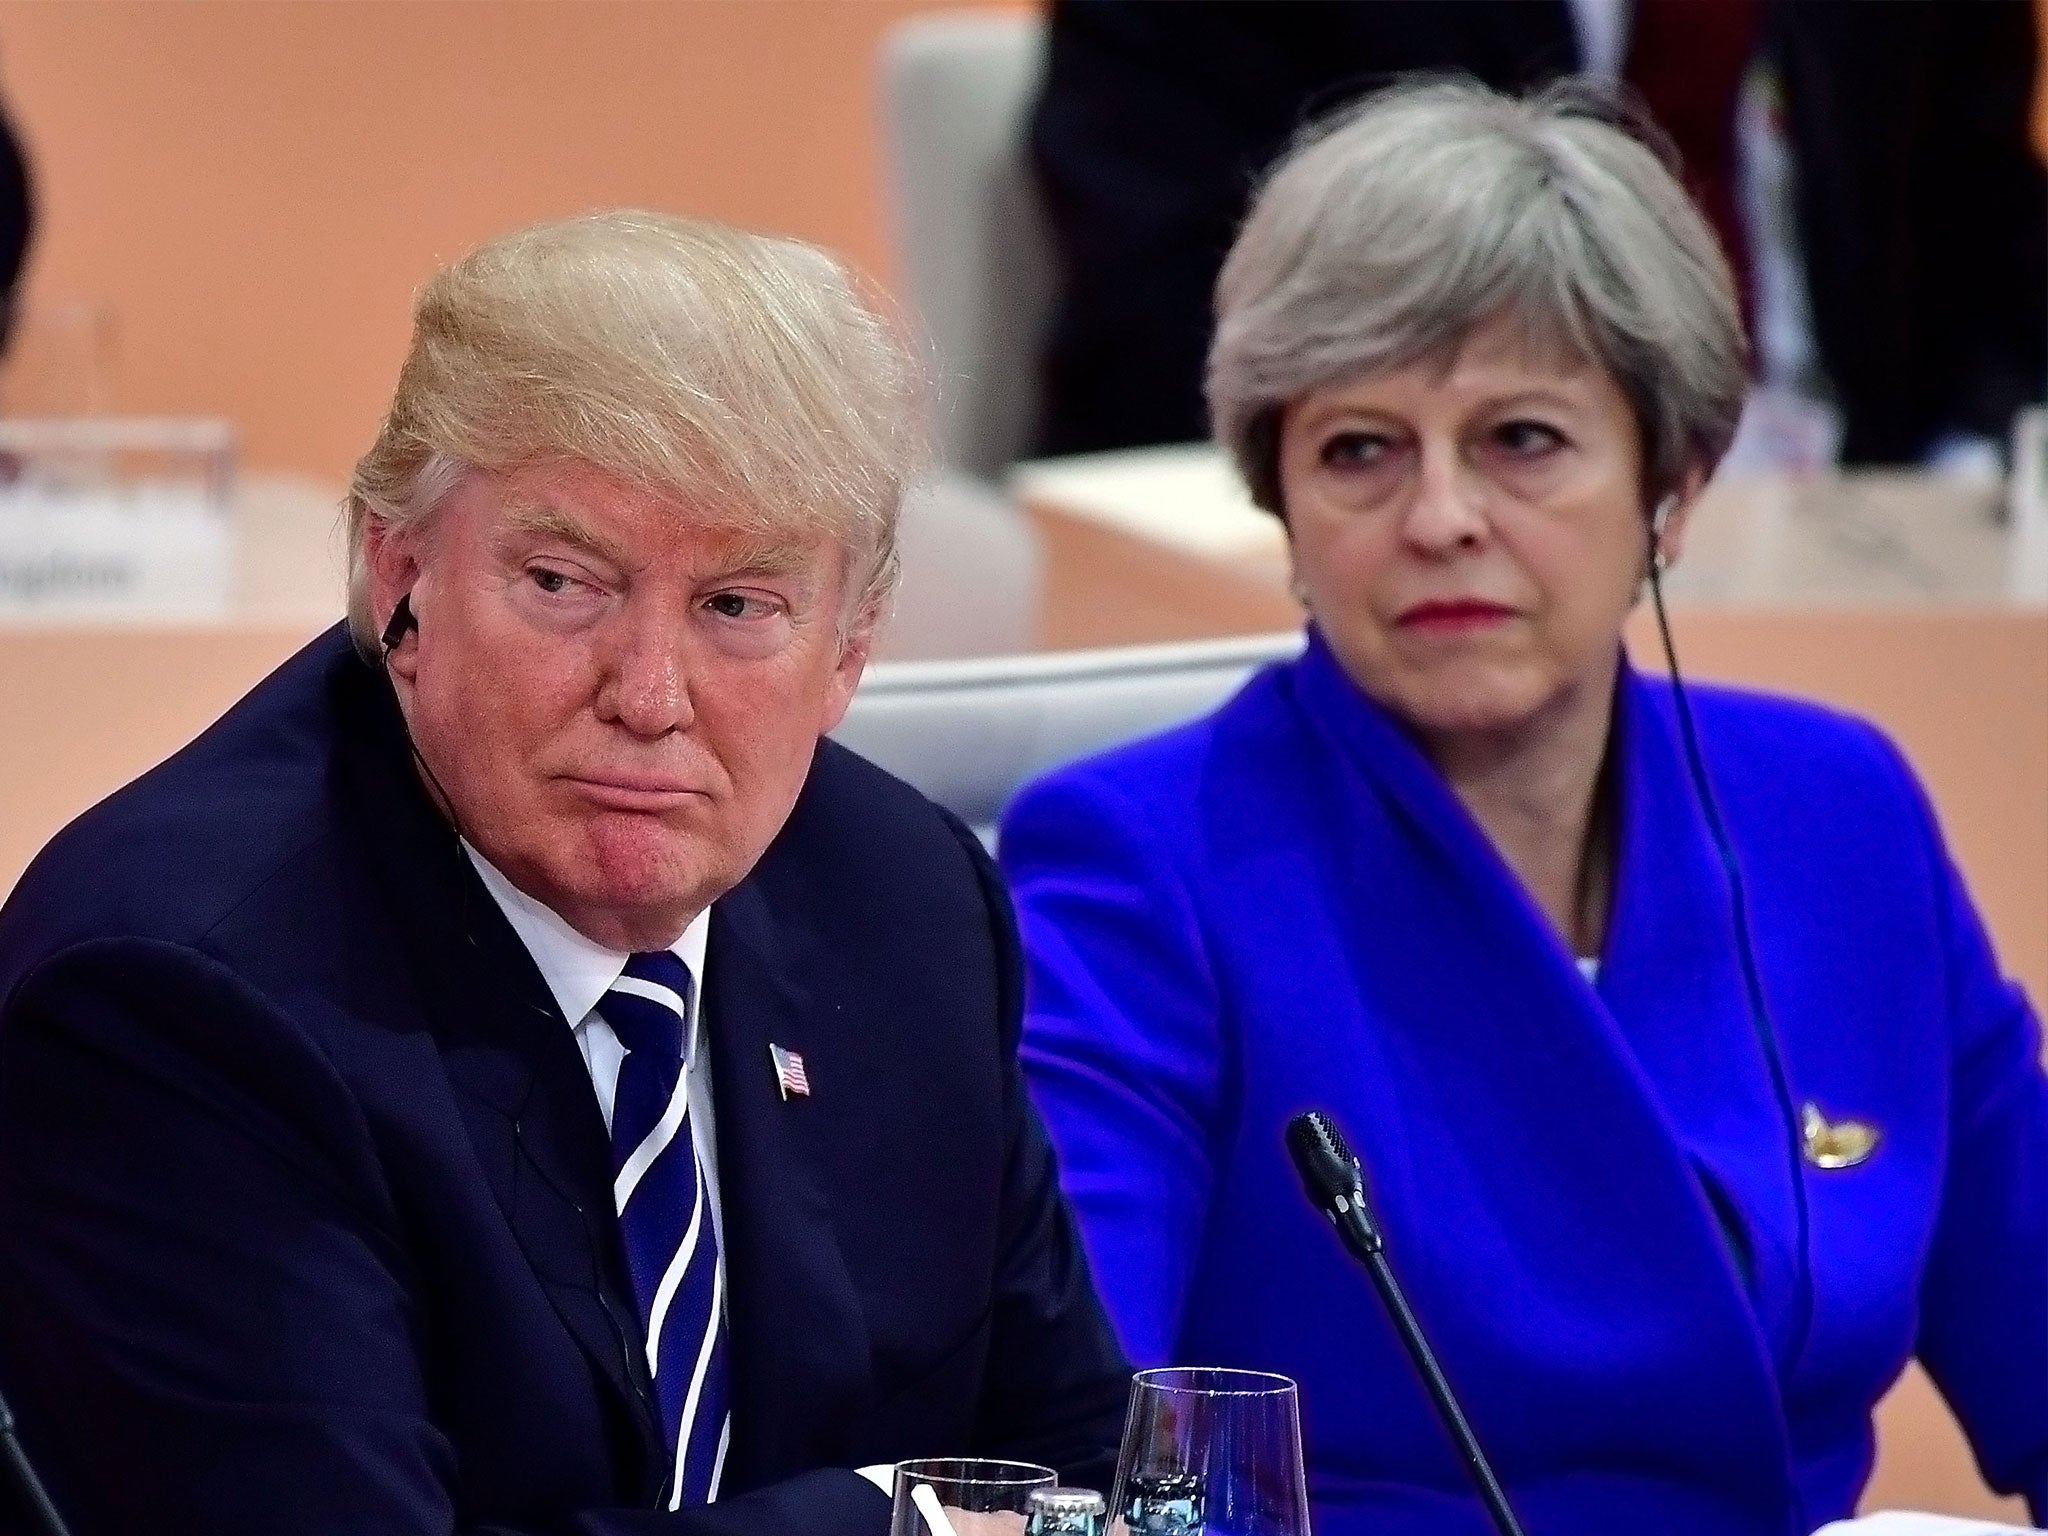 Theresa May also discussed the situation in Syria with Donald Trump during a call on Sunday afternoon